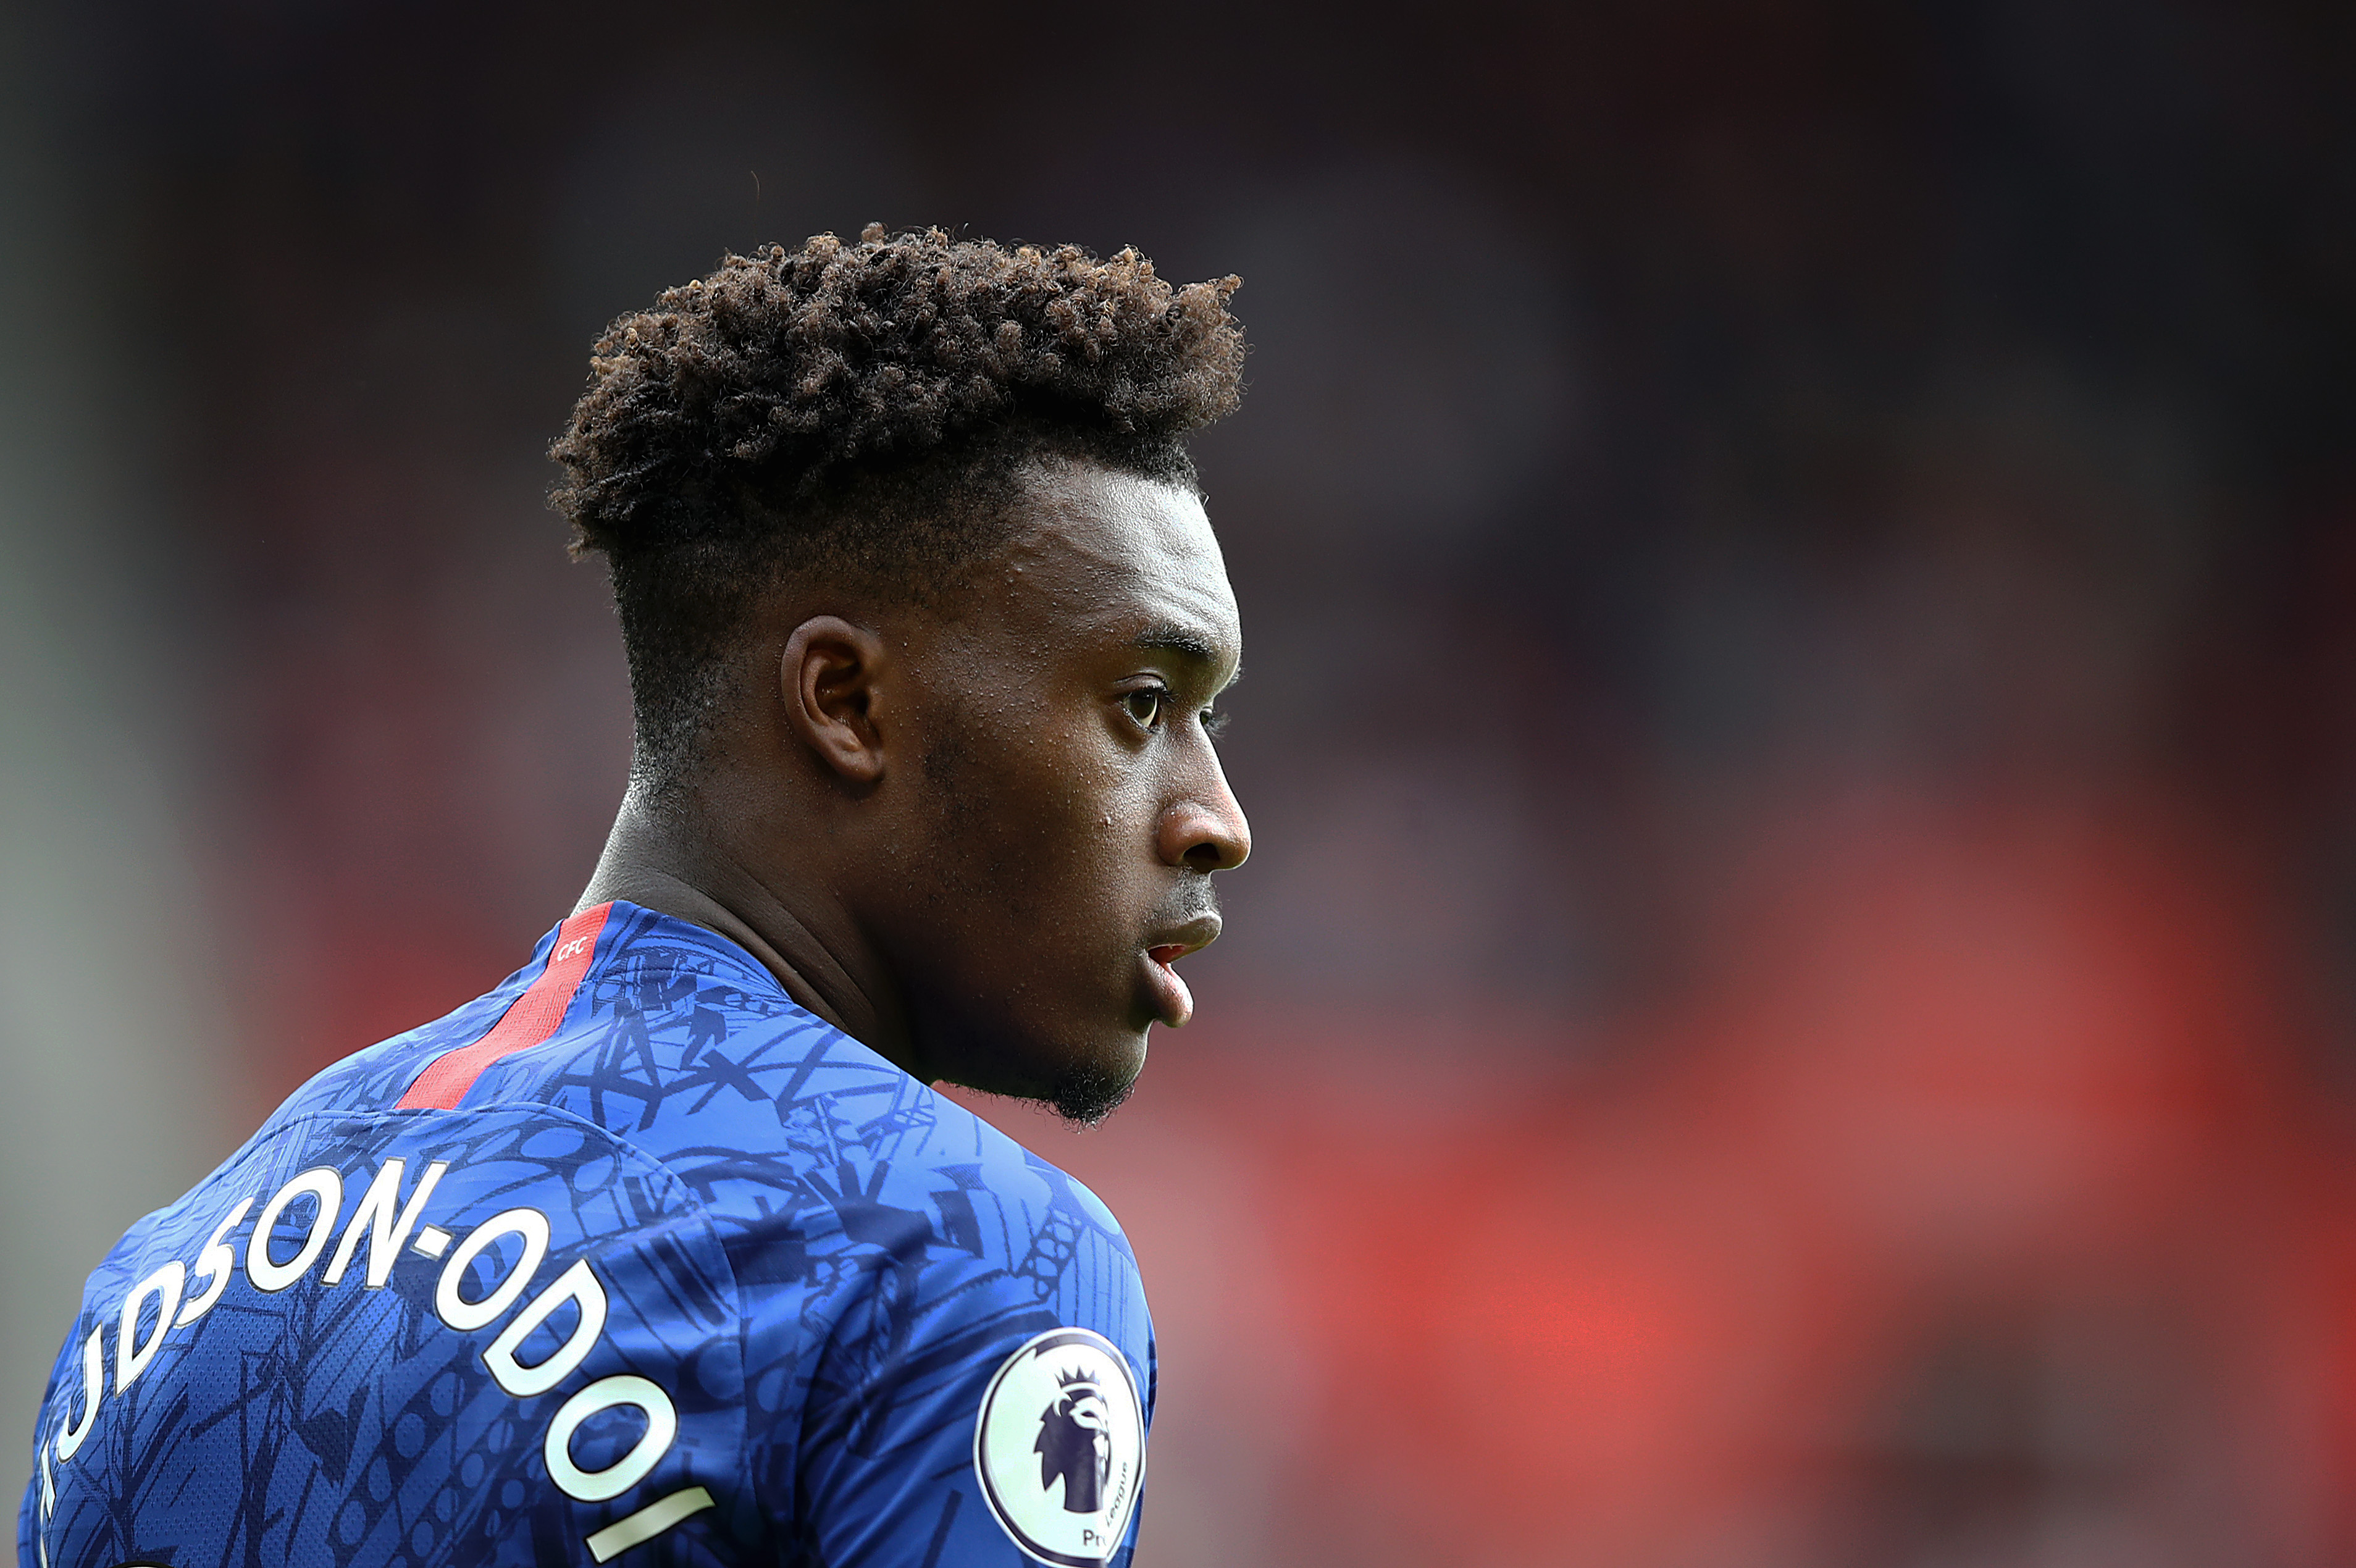 New manager, new role for Callum Hudson-Odoi (Picture Courtesy - AFP/Getty Images)